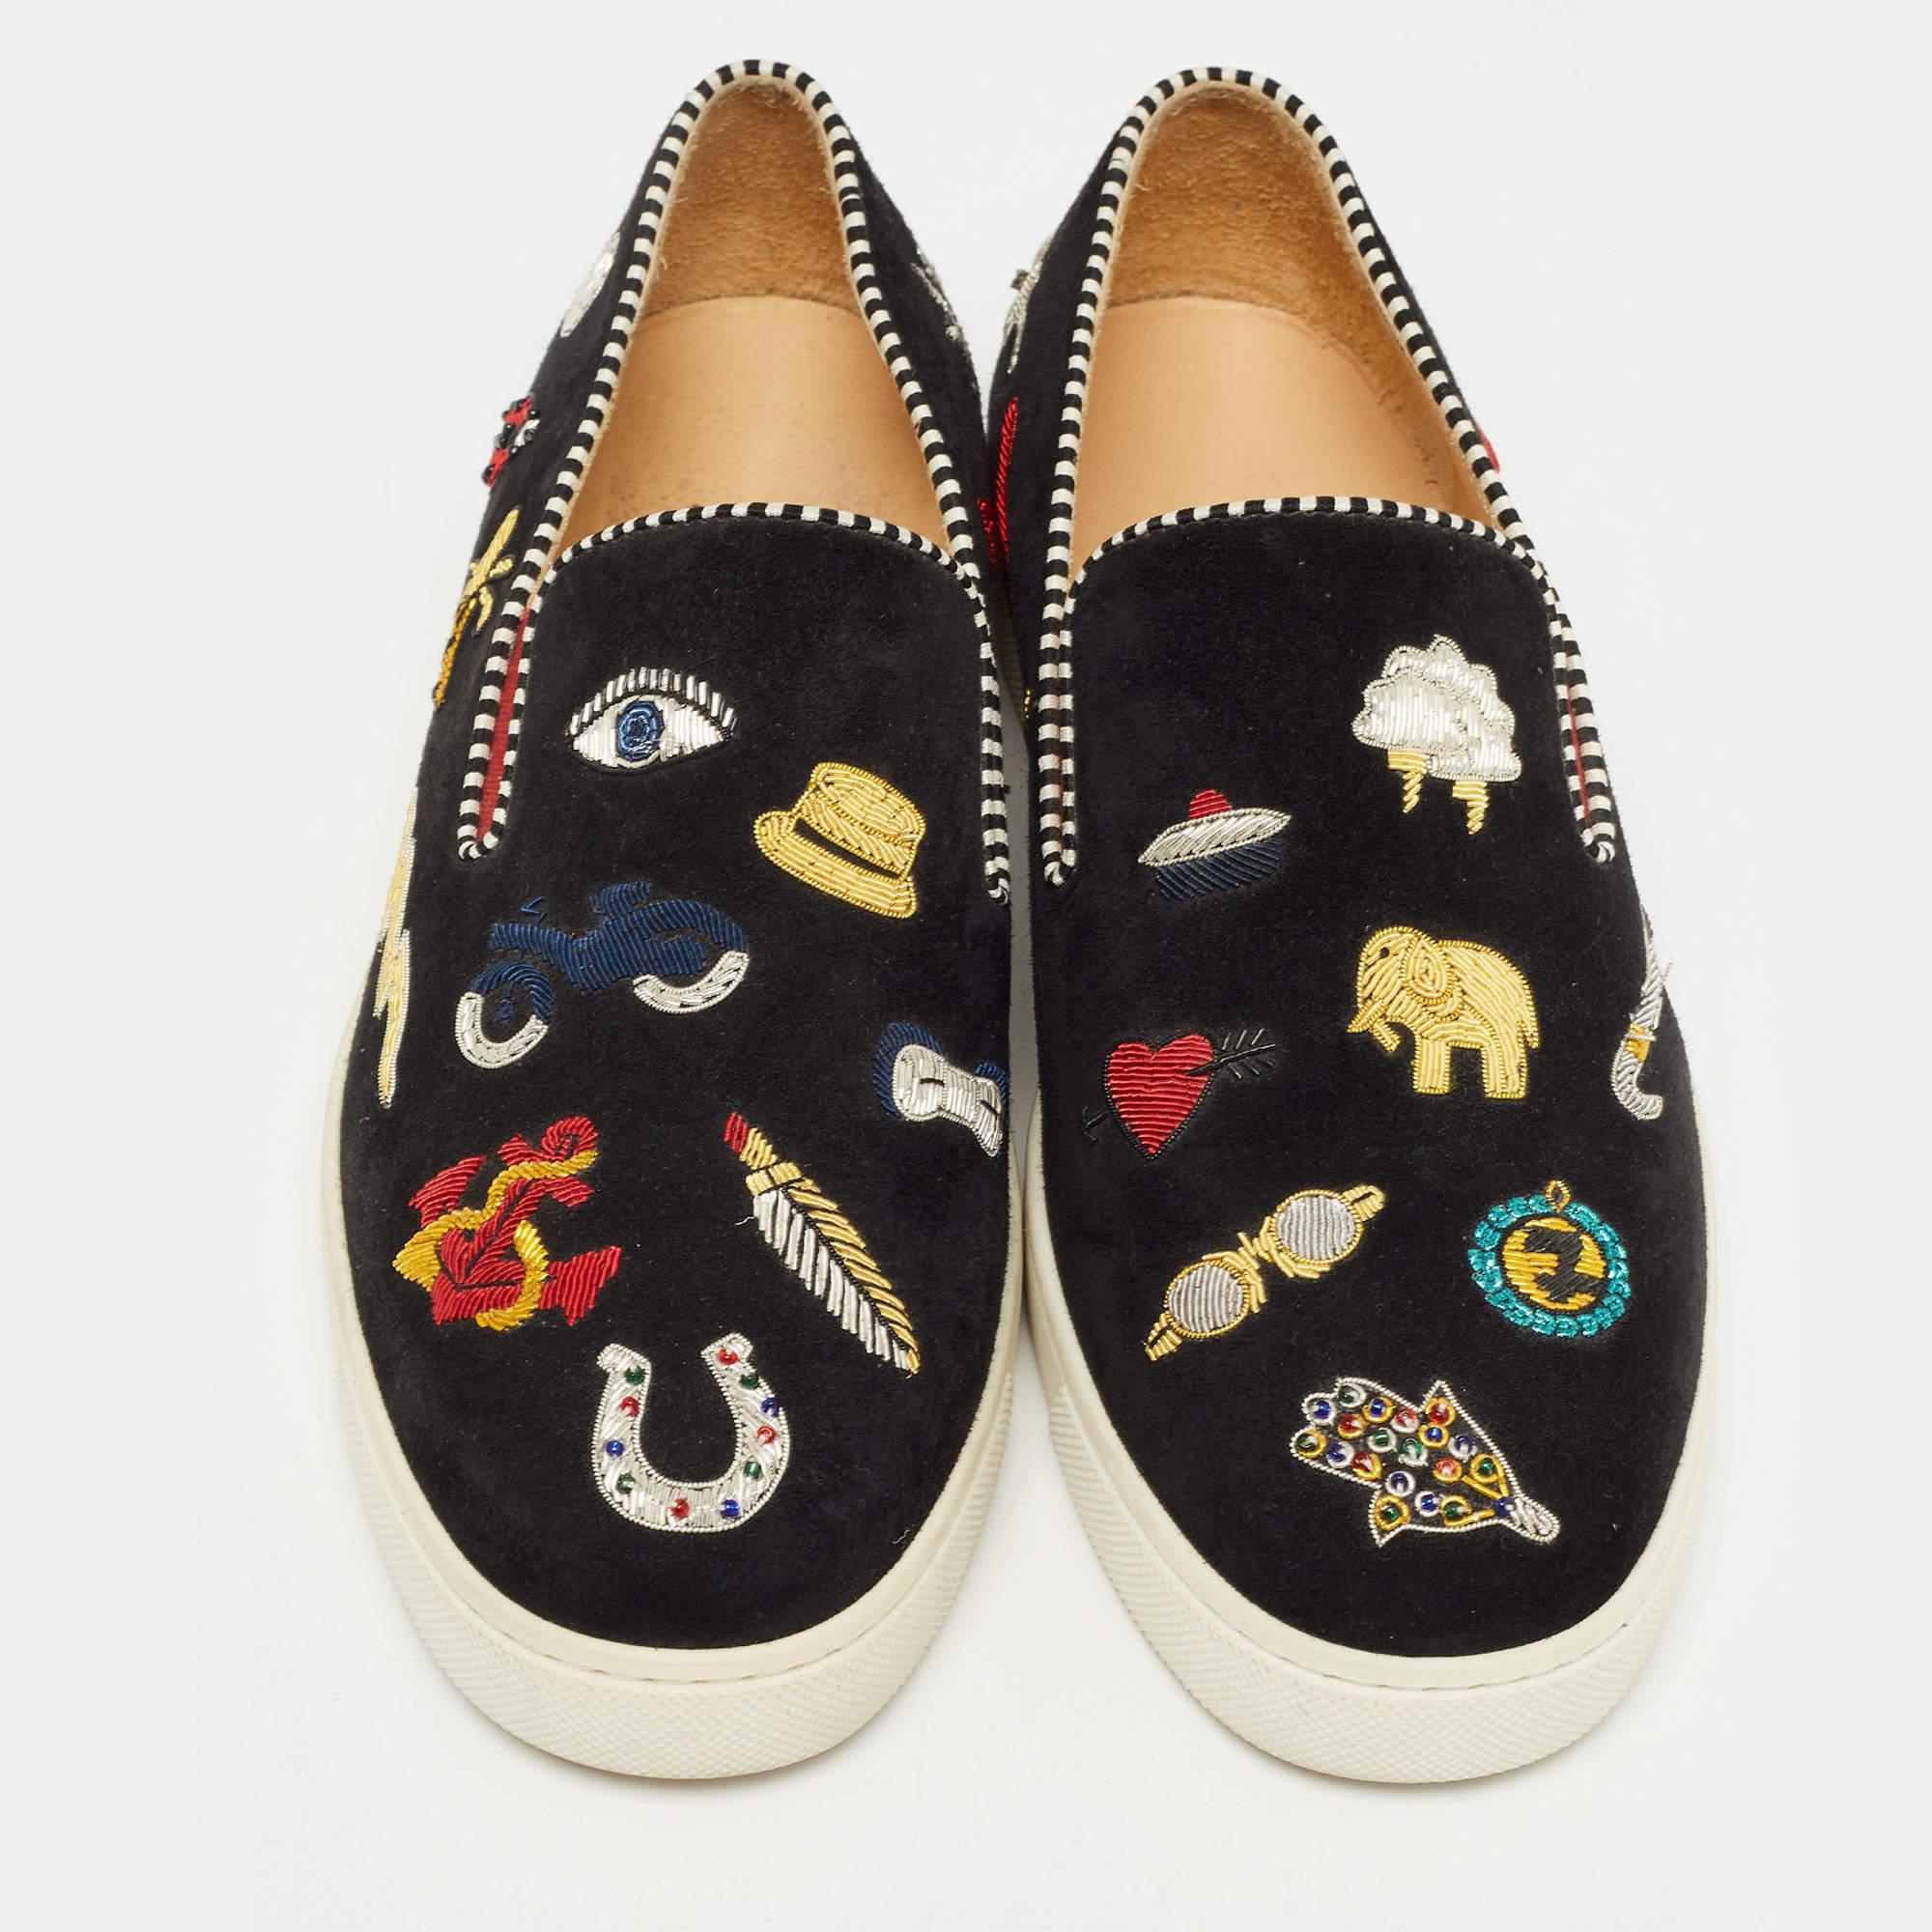 Designed to elevate your style quotient and give you comfort at the same time, Christian Louboutin brings you these lovely sneakers. They are crafted from black suede, beautified with embellishments, and set on durable rubber soles.

